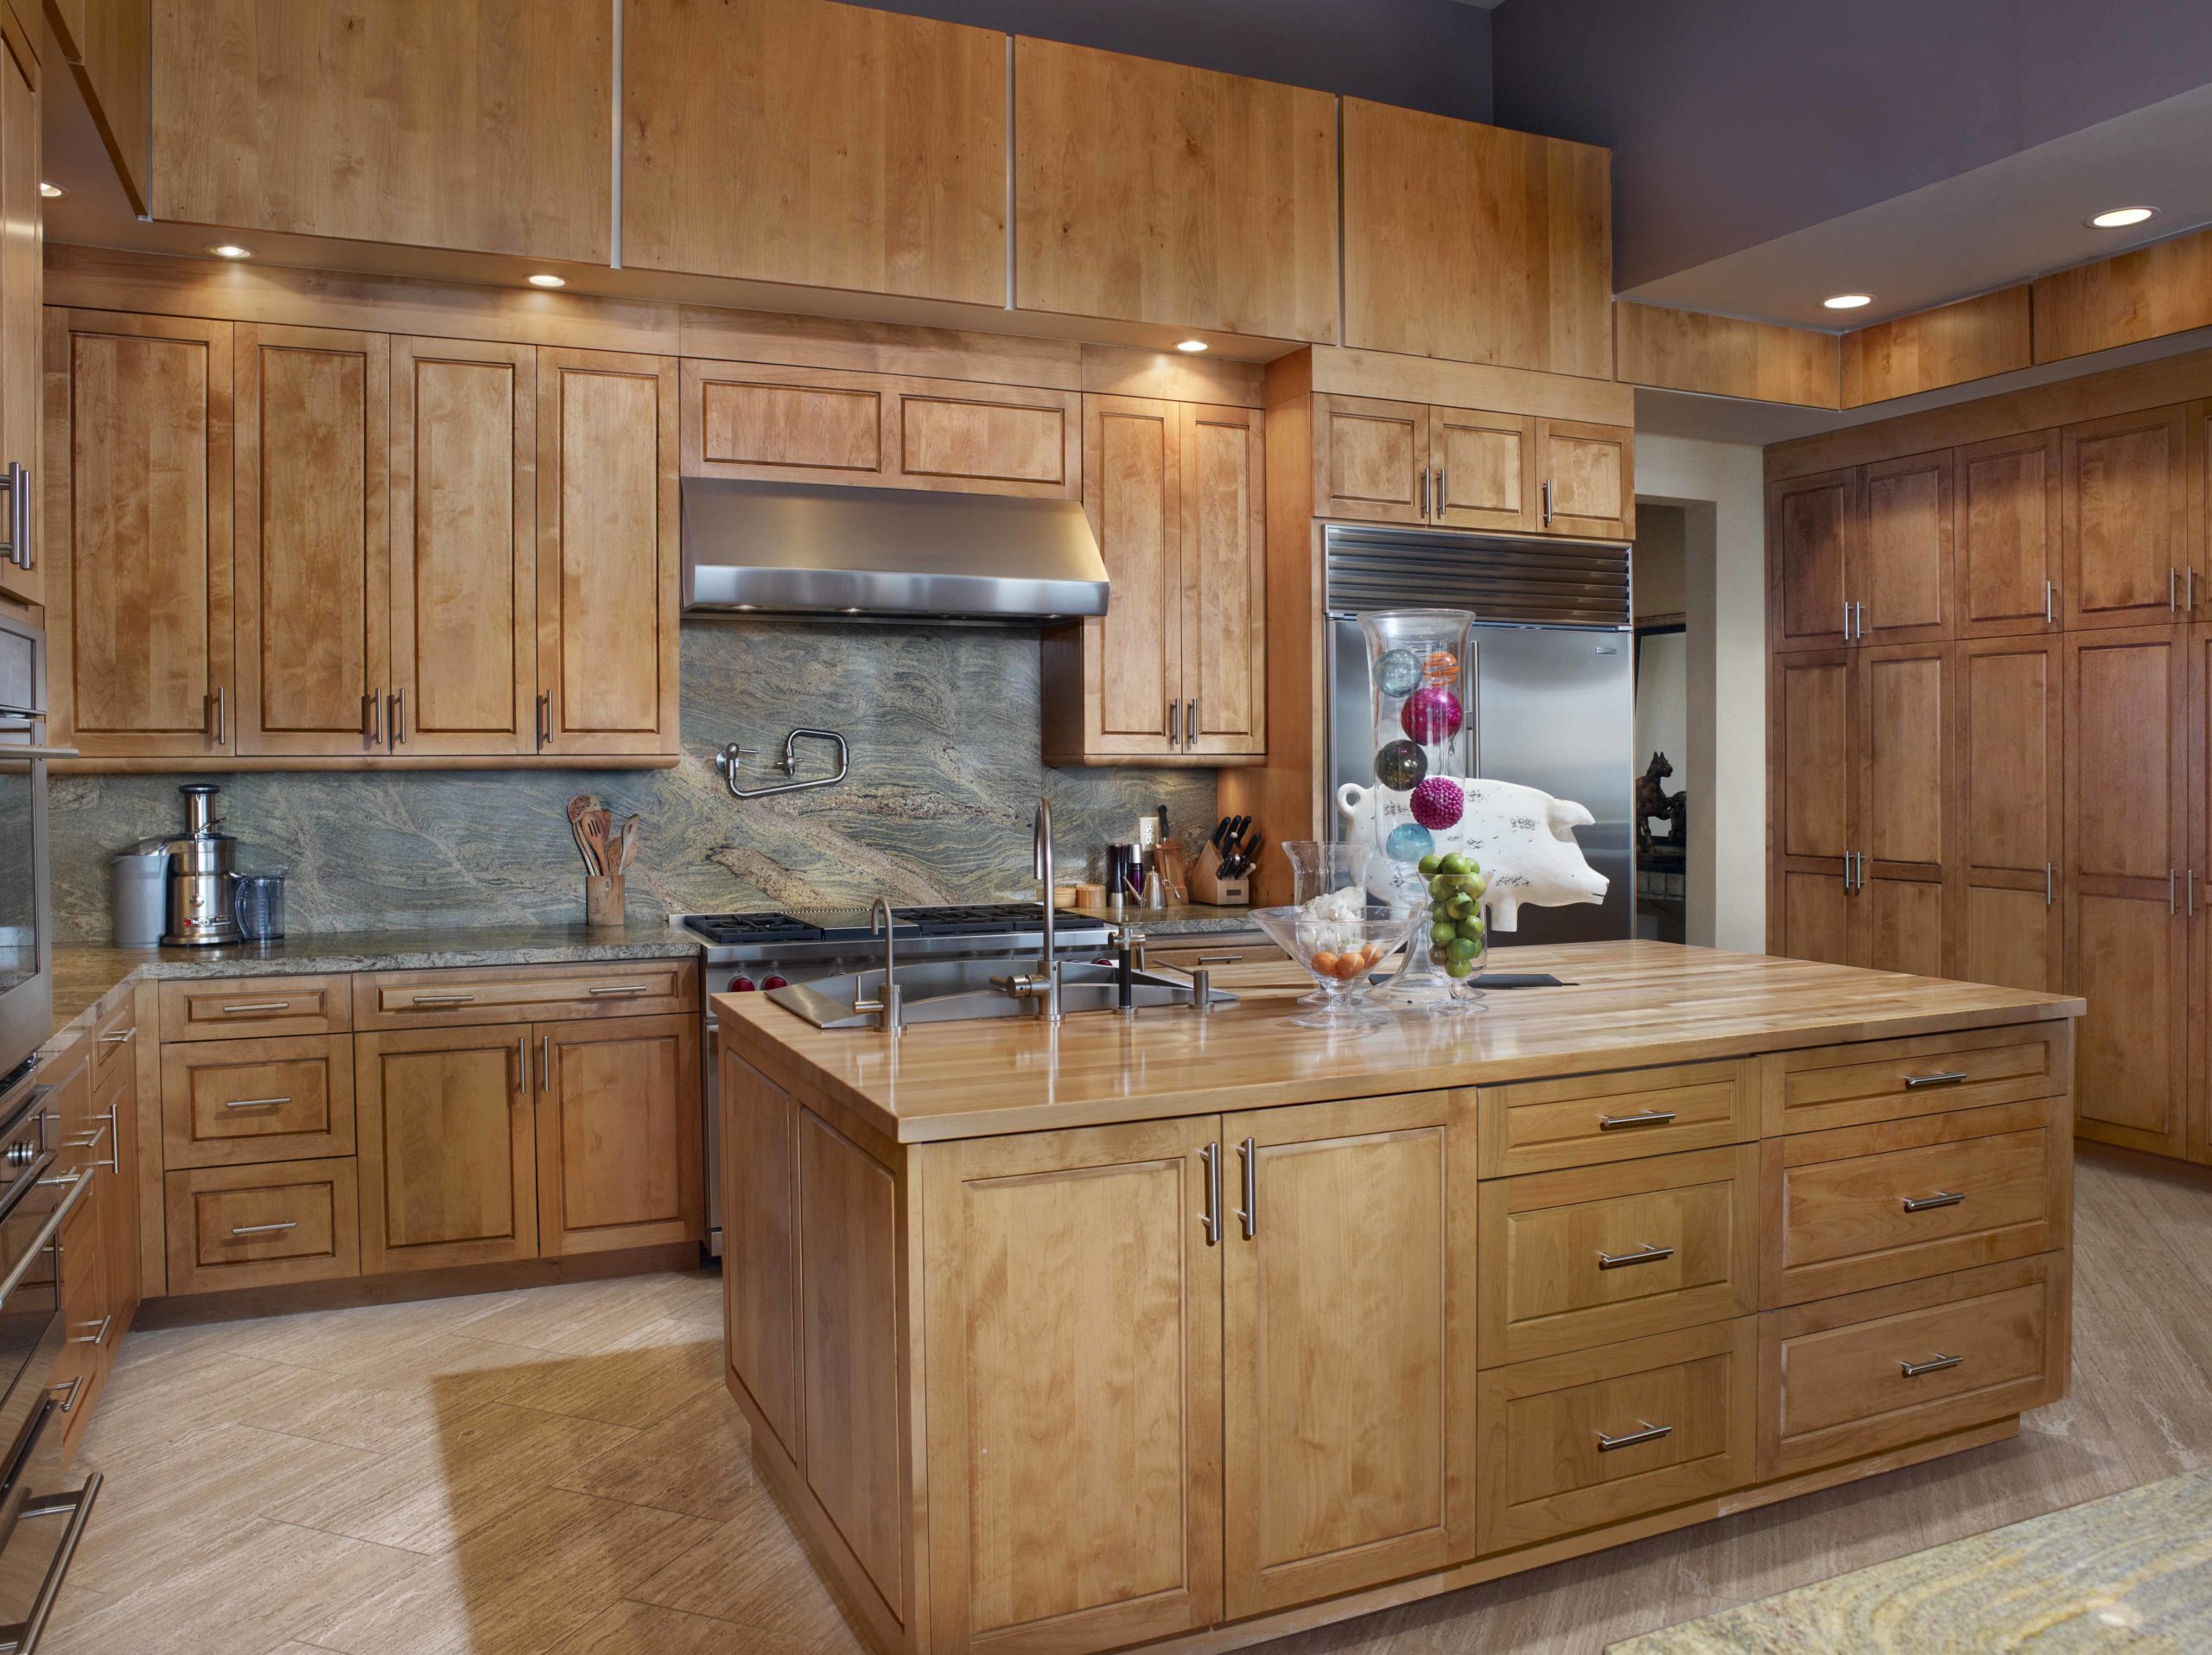 Tall wooden cabinets with stone backsplash